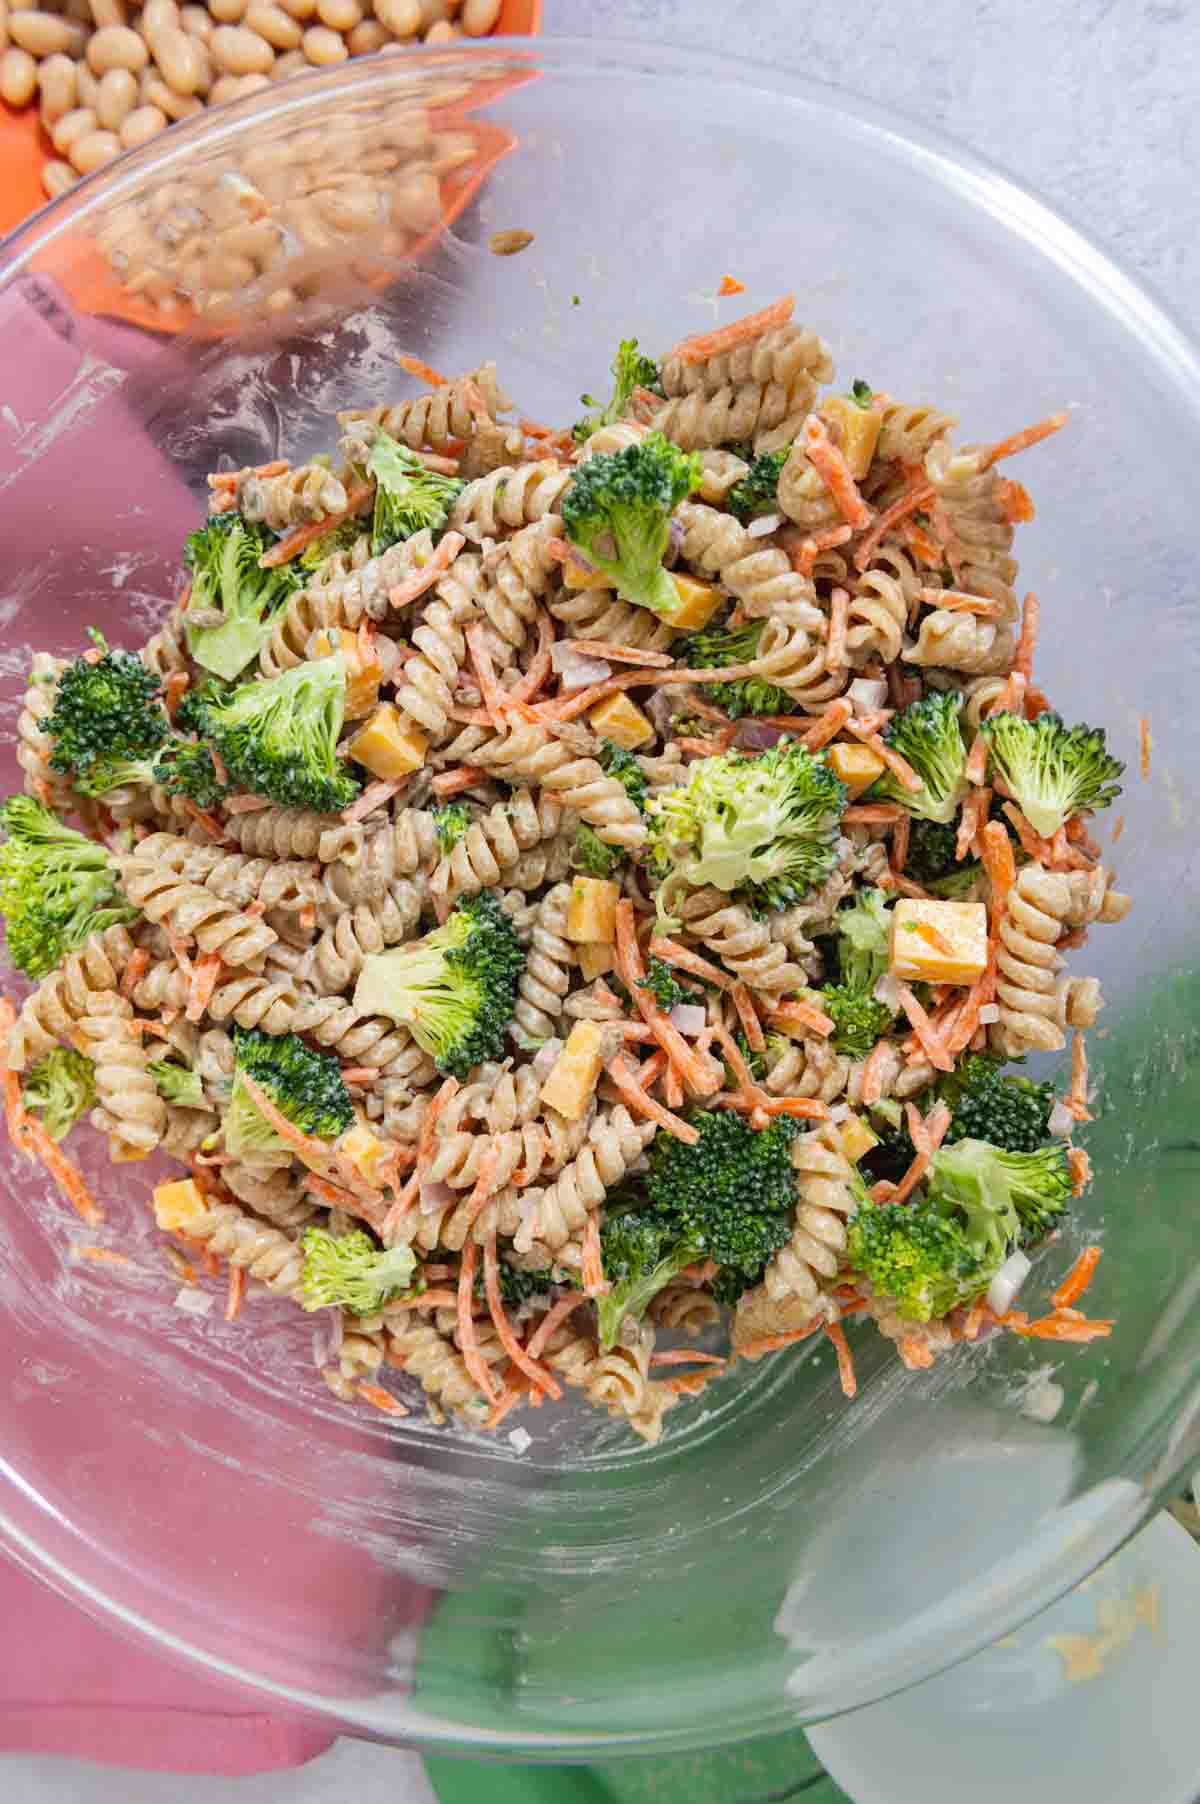 Large glass bowl filled with rotini pasta salad.